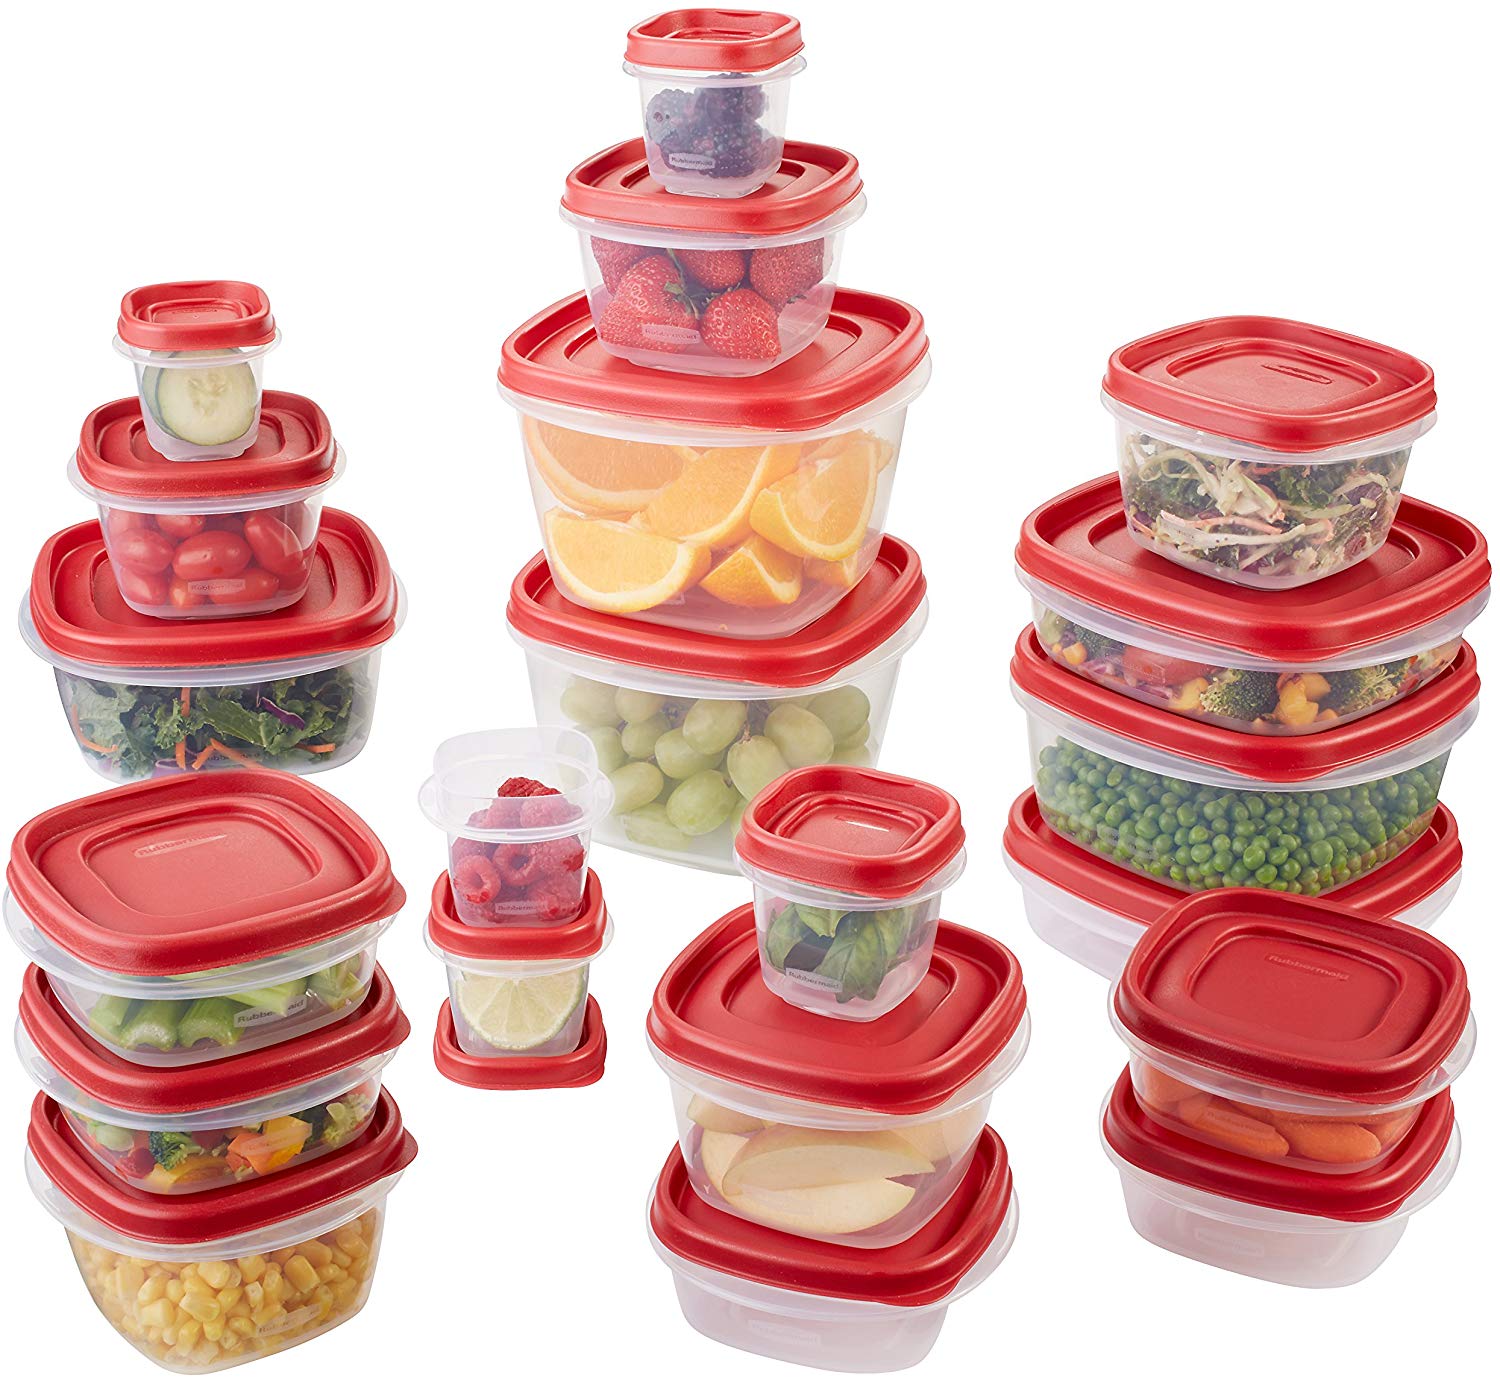 https://www.dontwasteyourmoney.com/wp-content/uploads/2019/11/rubbermaid-easy-find-lids-food-storage-containers-racer-red-42-piece-set-1880801-tupperware-set.jpg